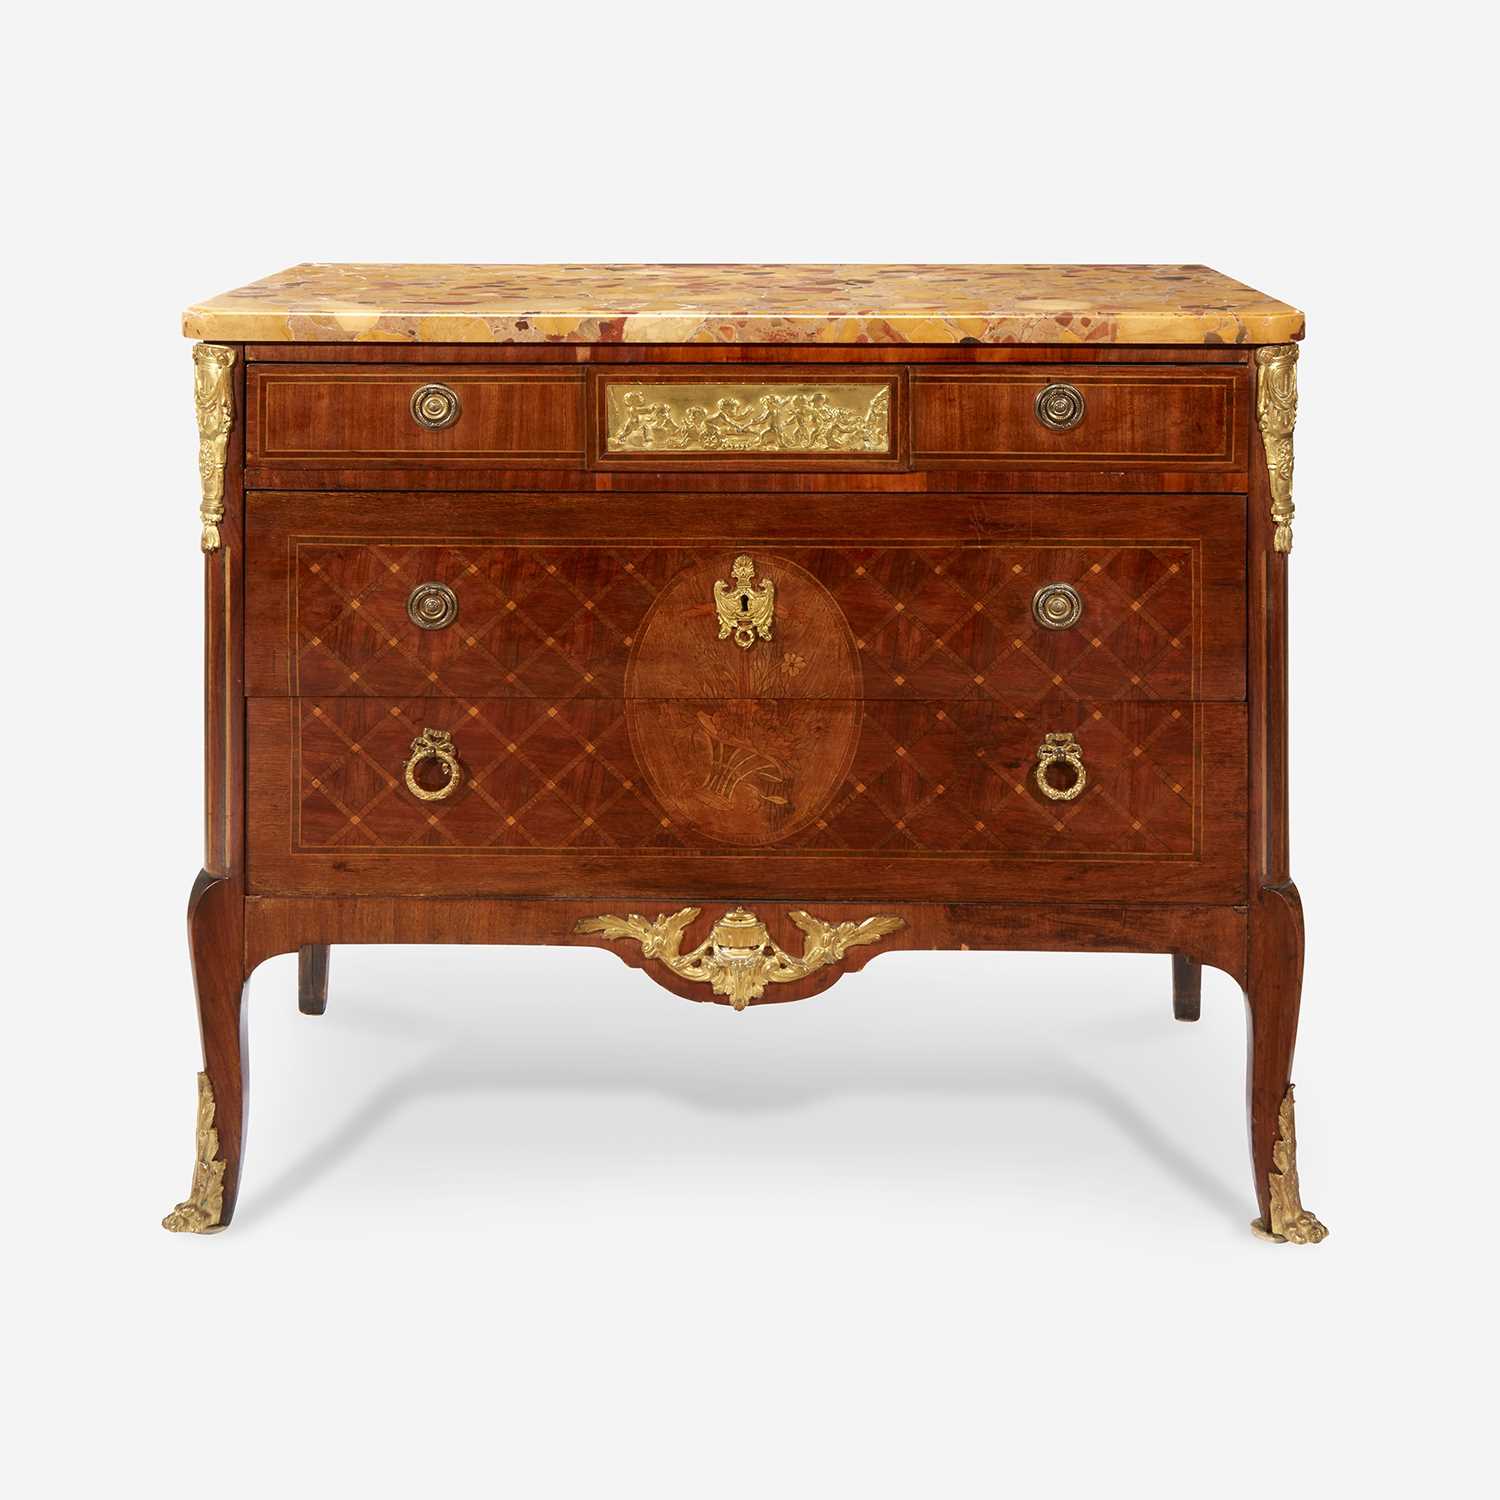 Lot 26 - A Louis XVI Style Gilt-Bronze Mounted Parquetry Commode